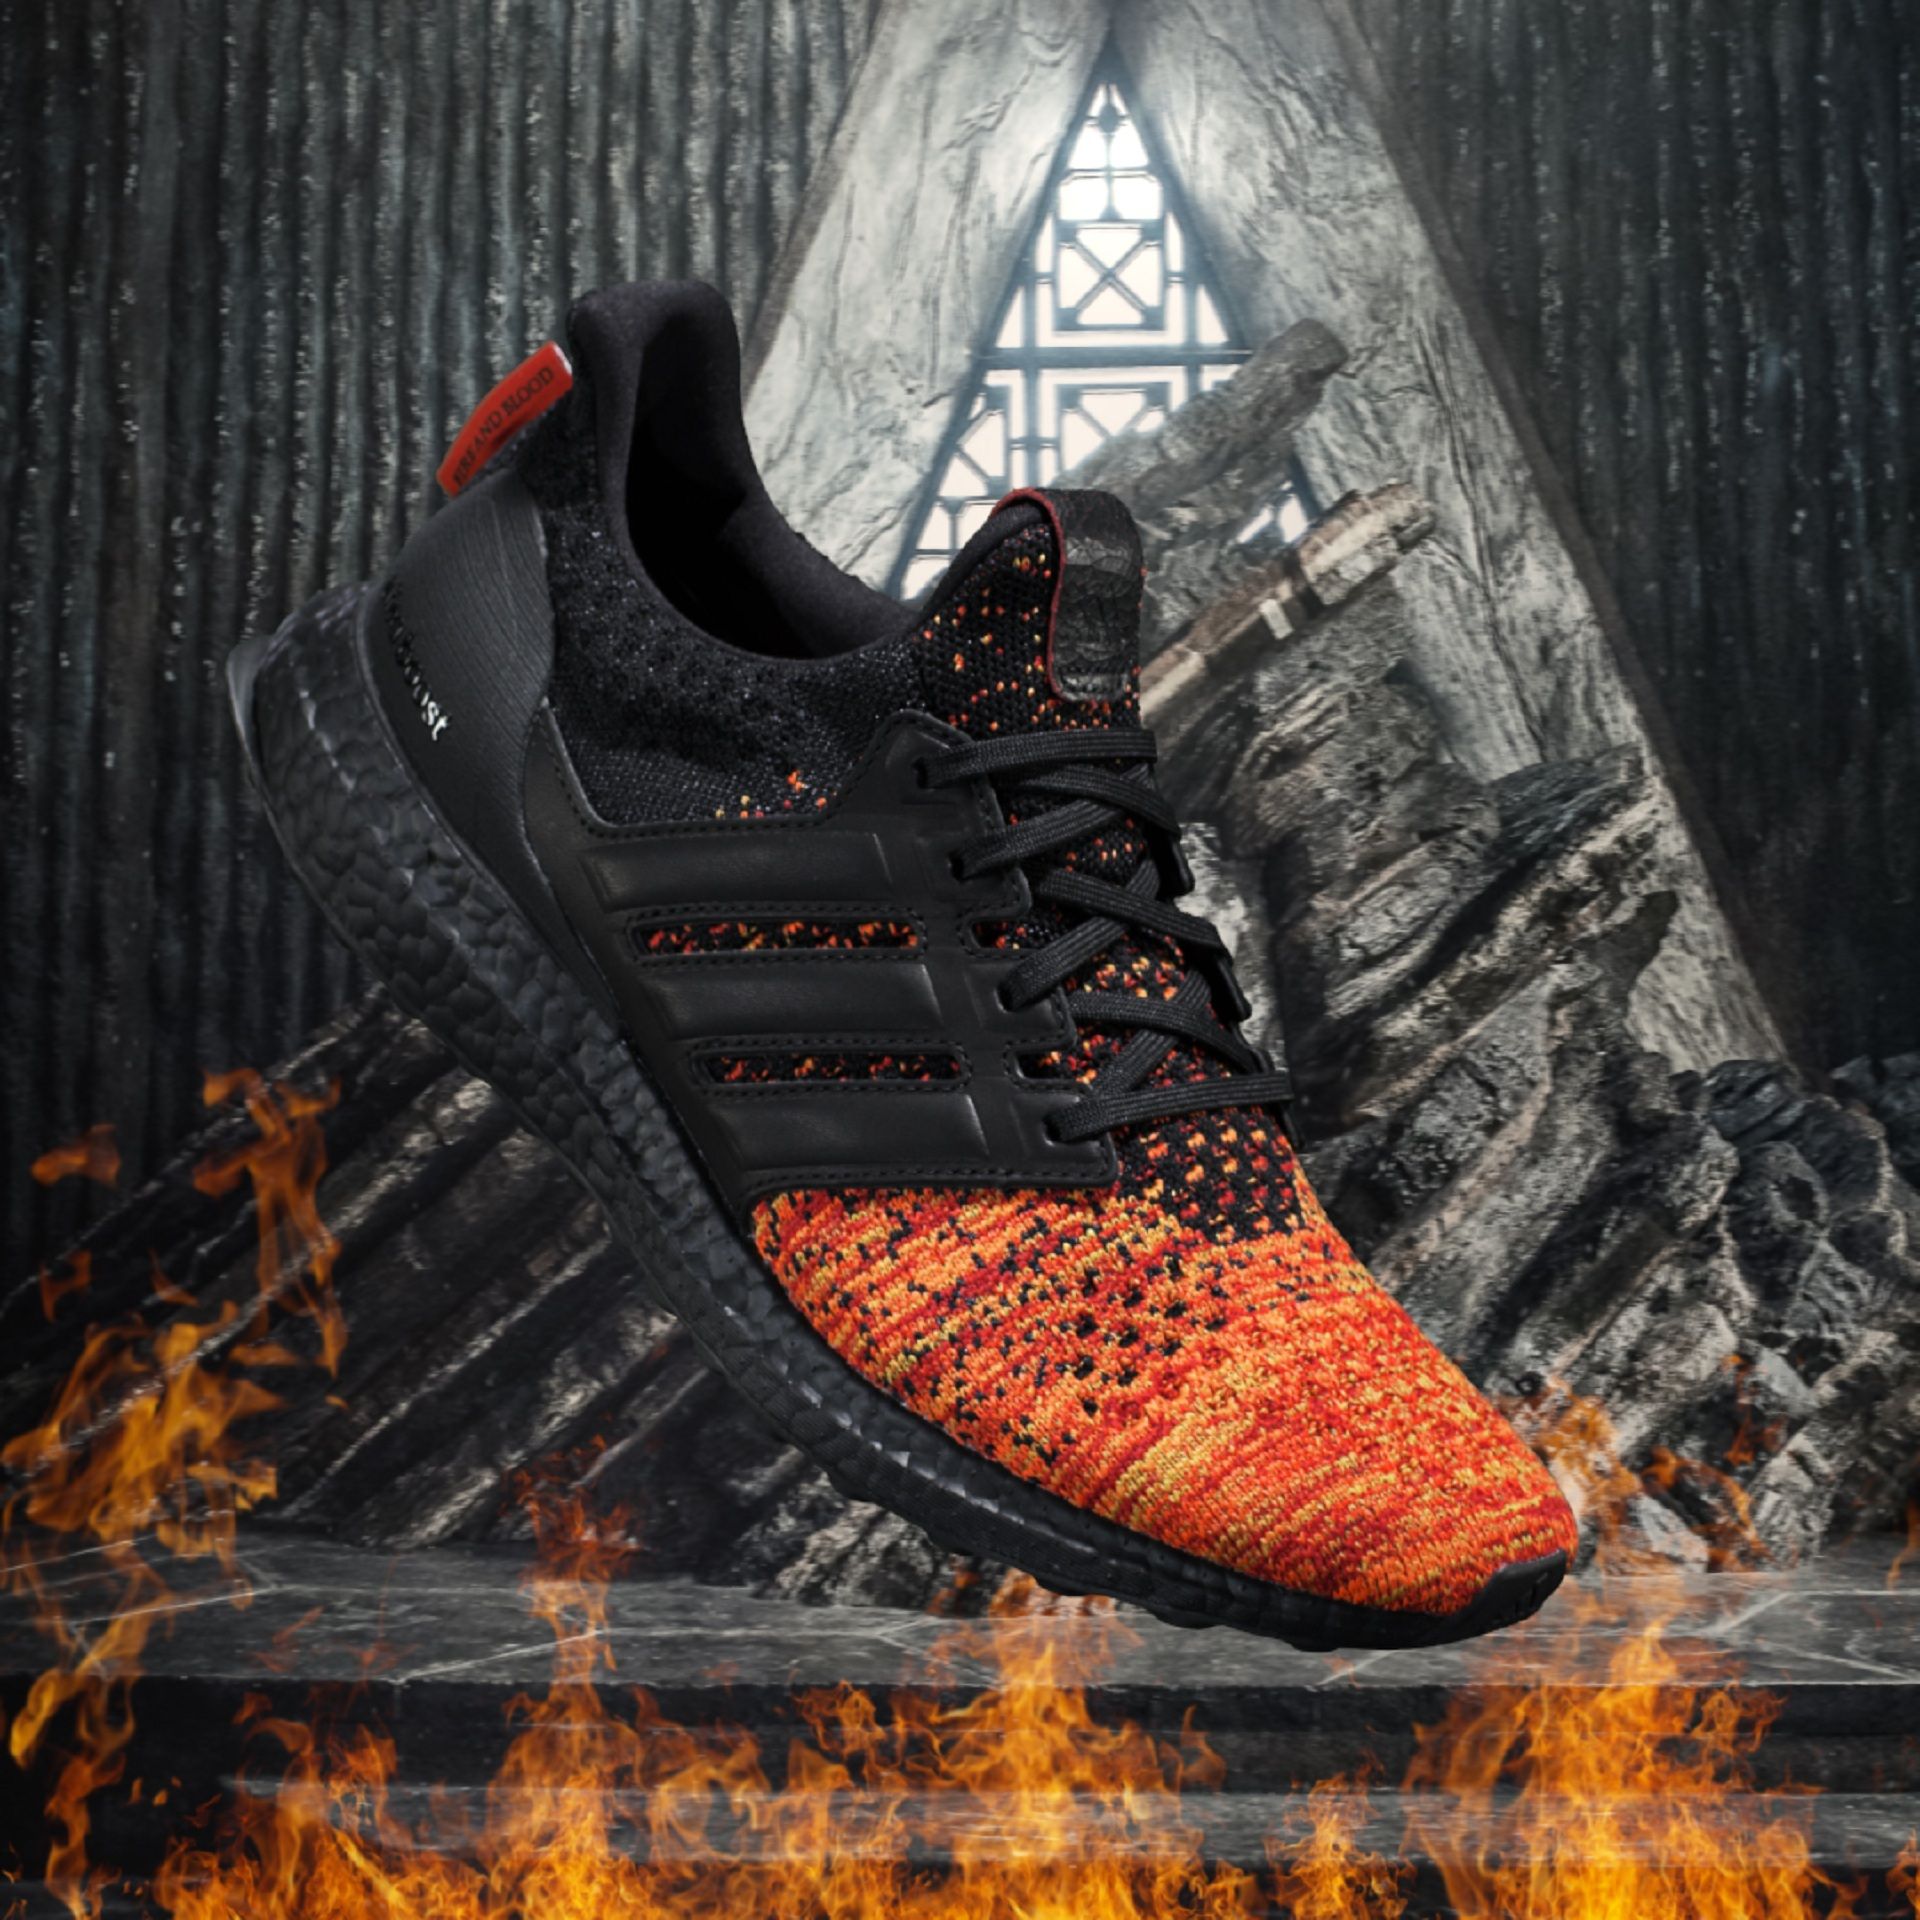 singer allocation Dishonesty The 'Game of Thrones' Adidas Ultra Boost Collection Finally Makes Its Debut